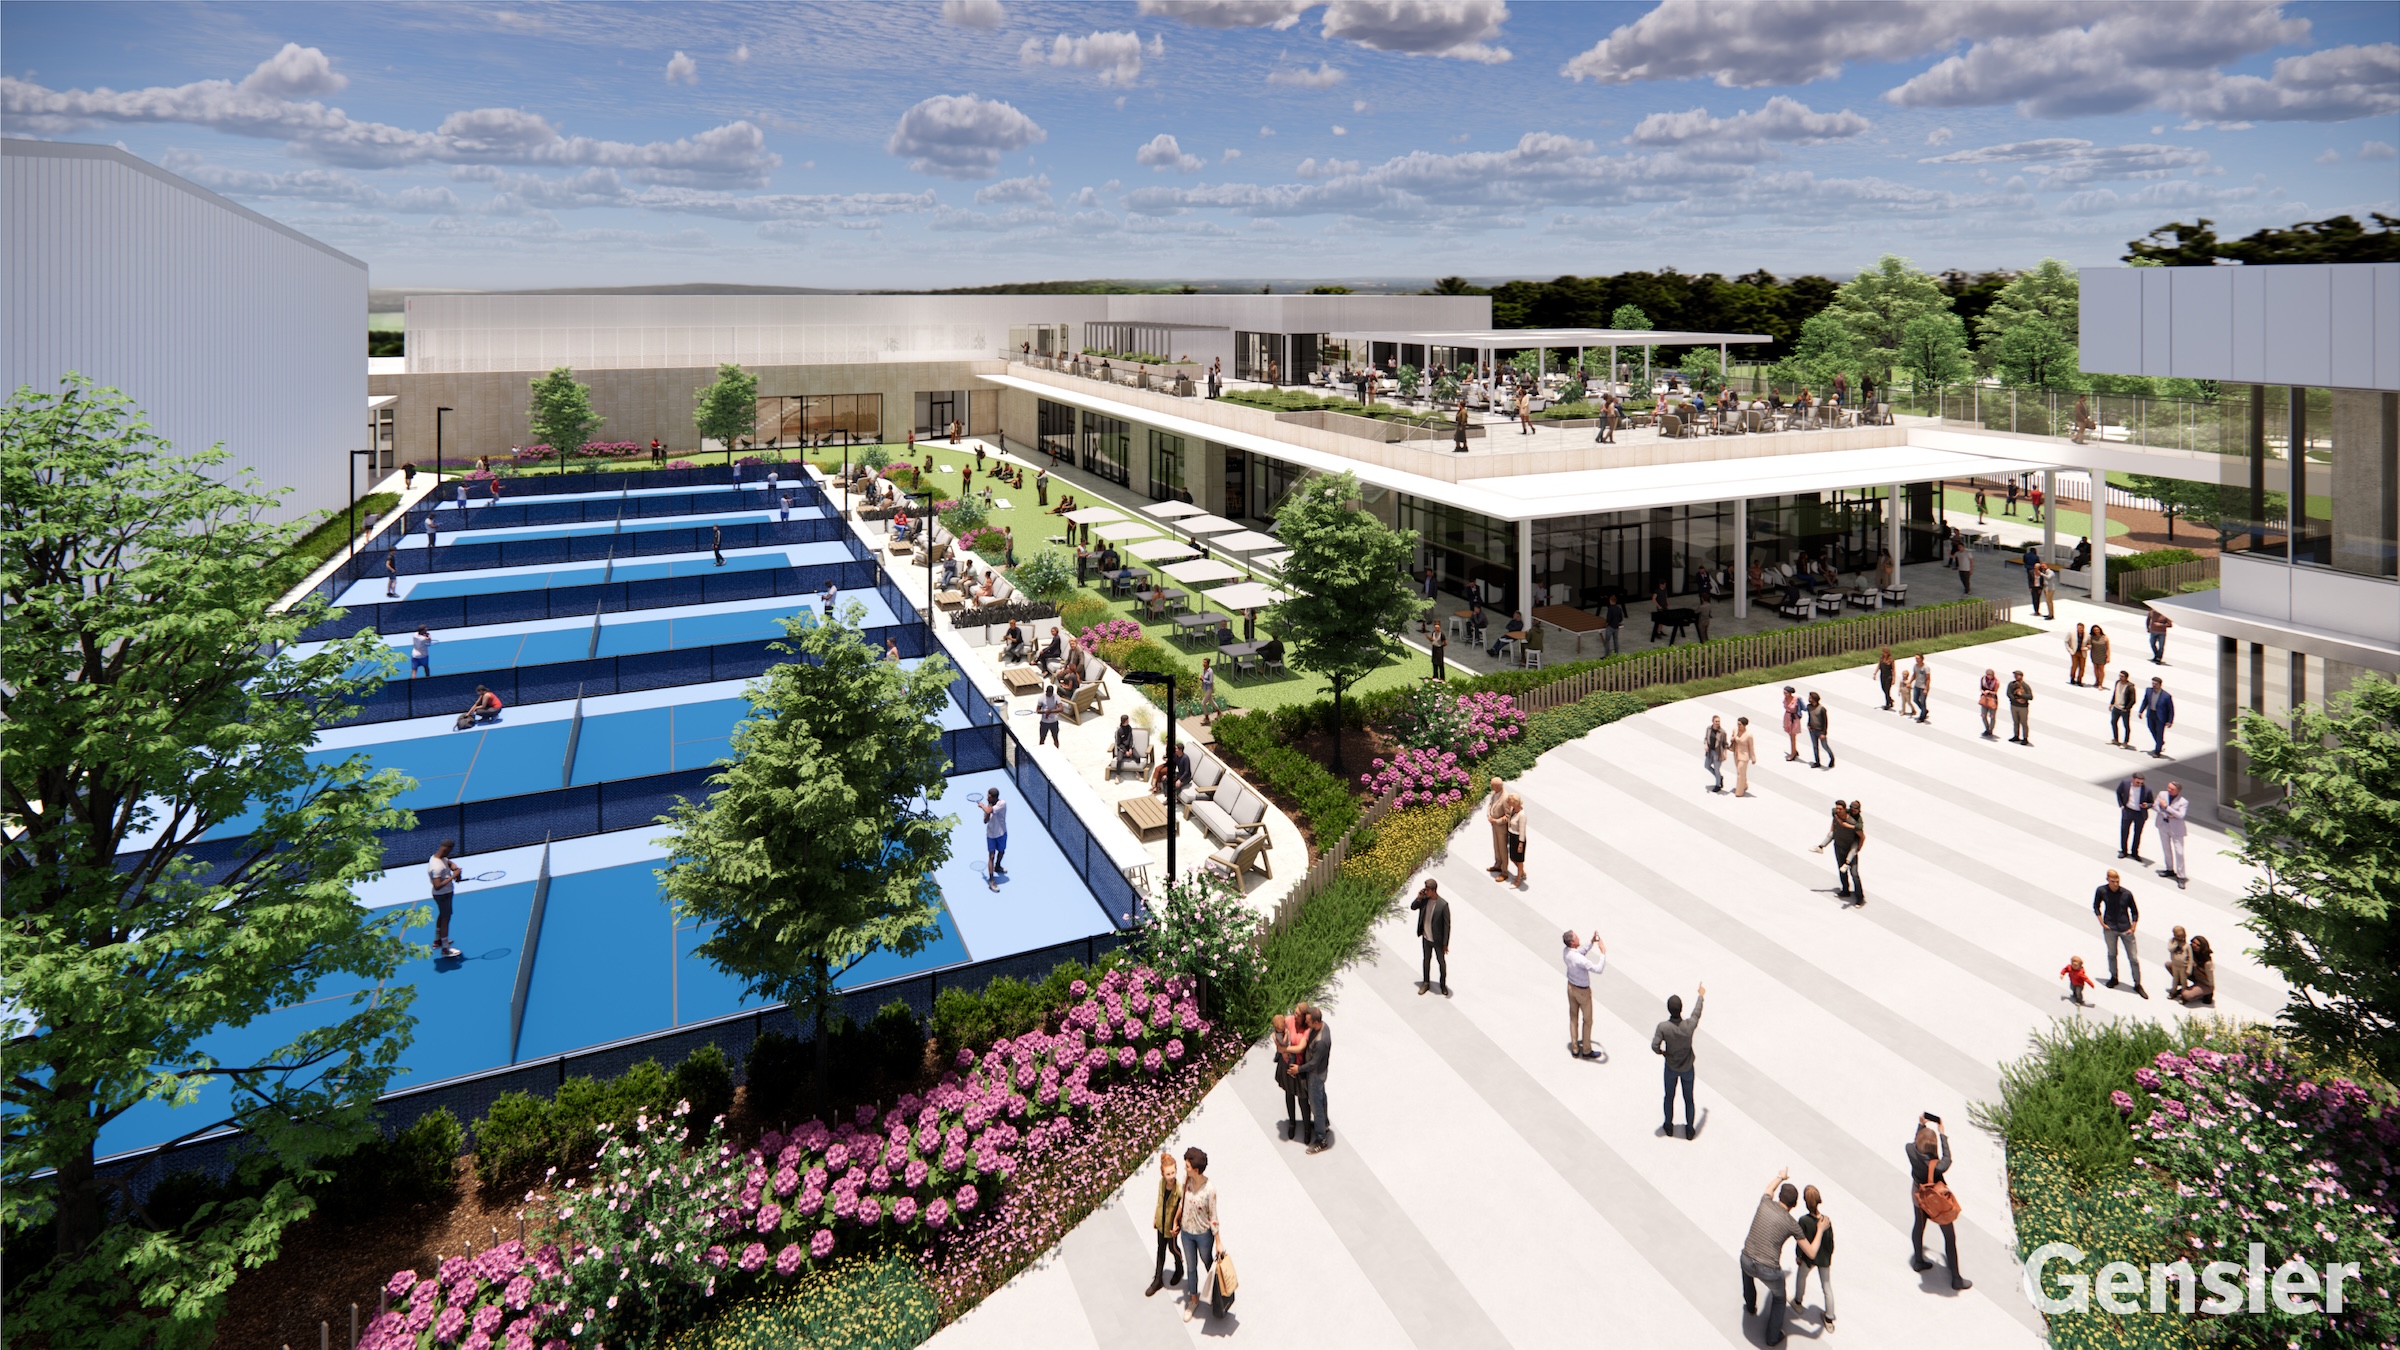 The Cincinnati Open undergoes a campus-wide renovation ahead of the expanded 2025 tournament